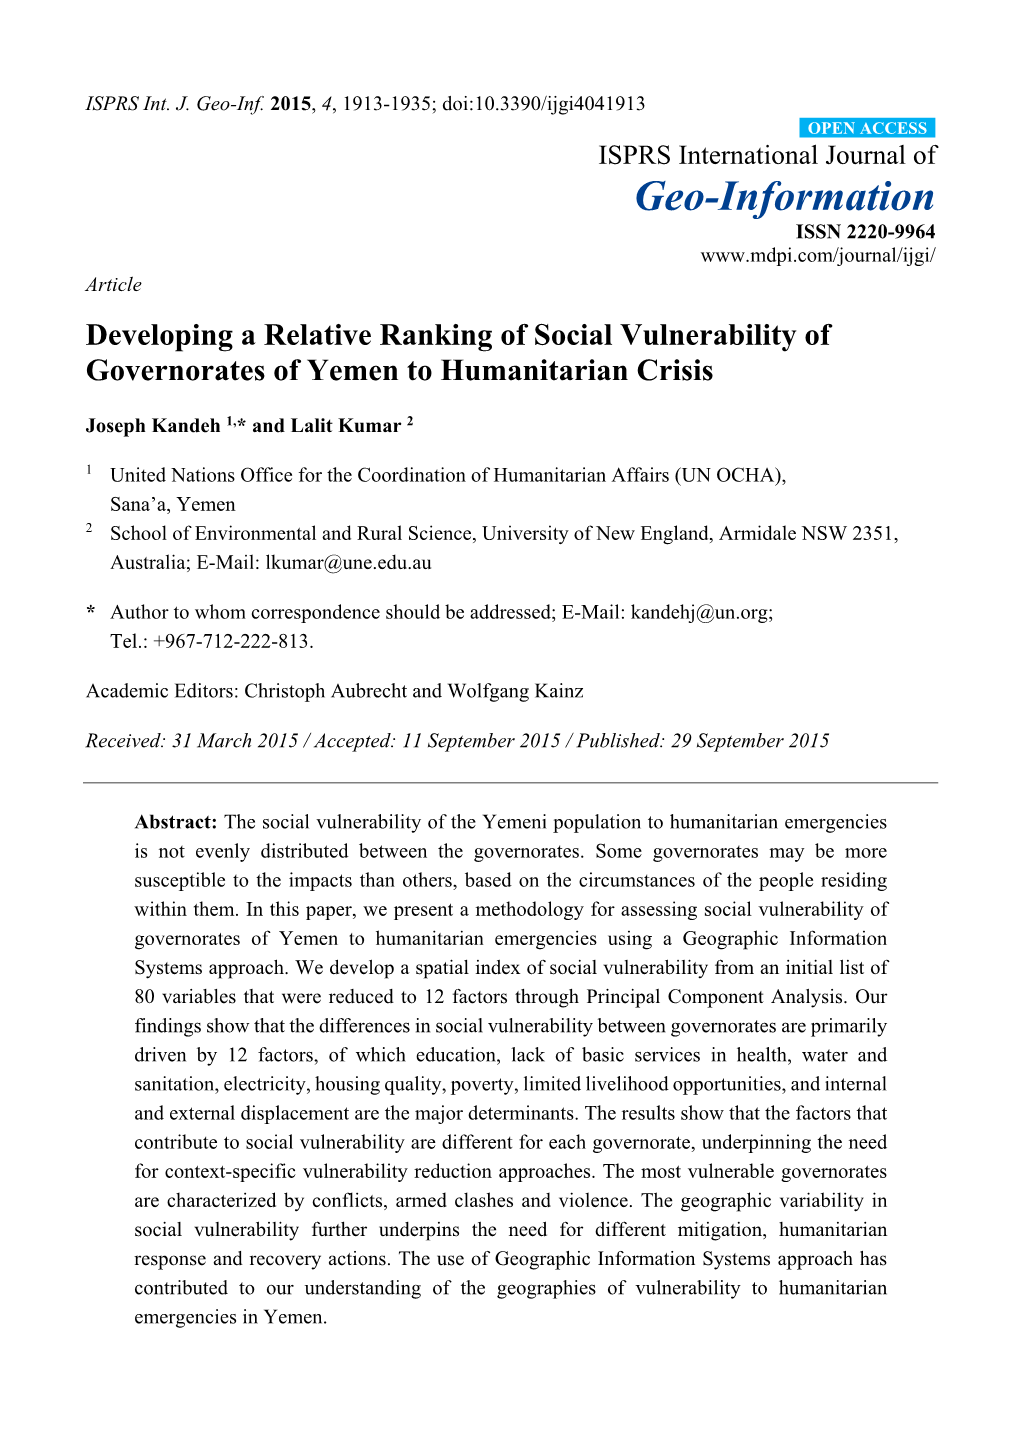 Developing a Relative Ranking of Social Vulnerability of Governorates of Yemen to Humanitarian Crisis